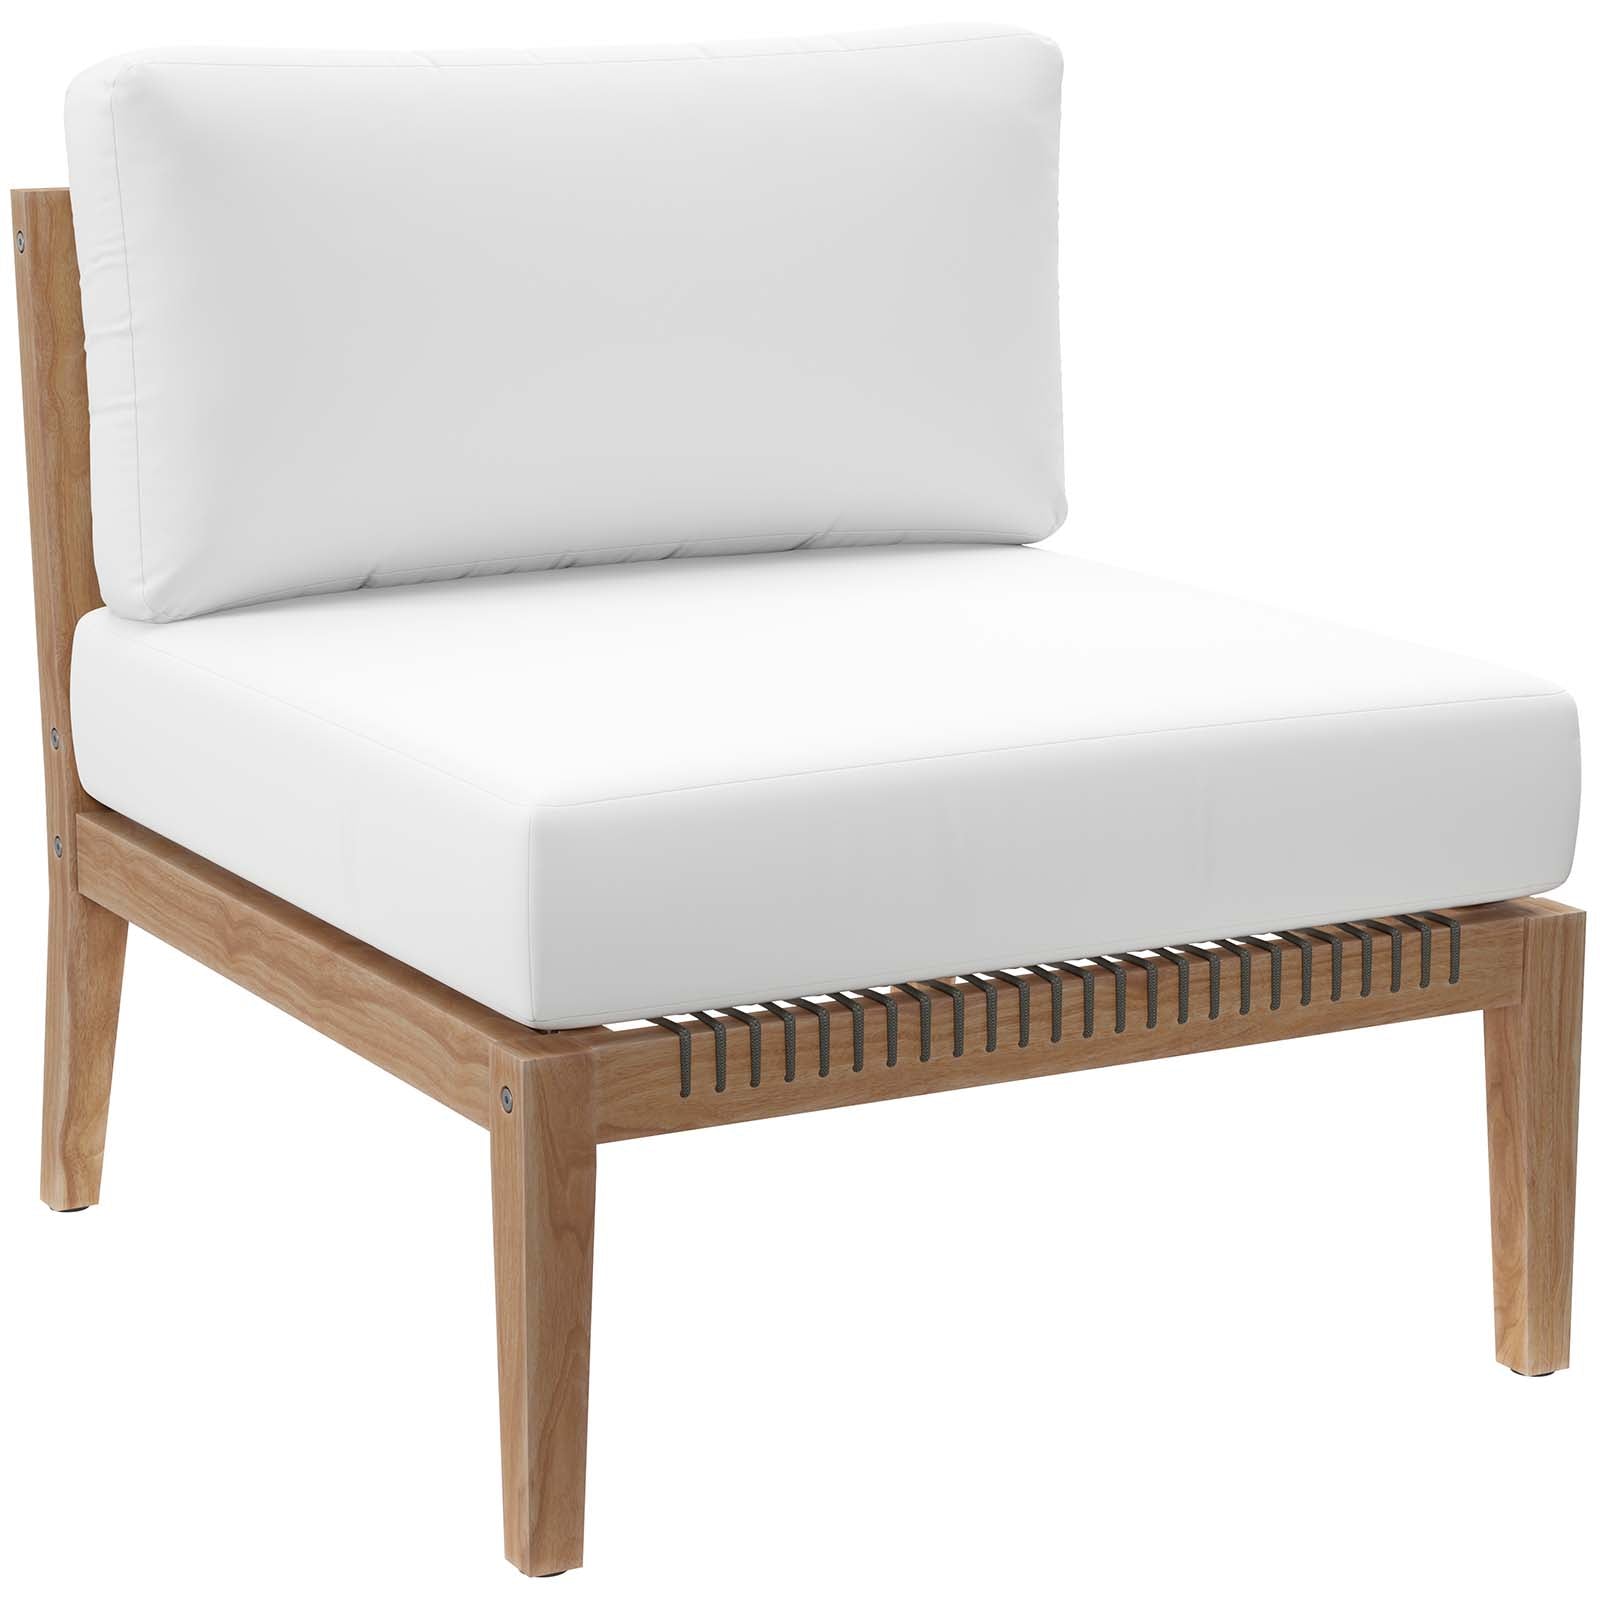 Clearwater Outdoor Patio Teak Wood Armless Chair - East Shore Modern Home Furnishings